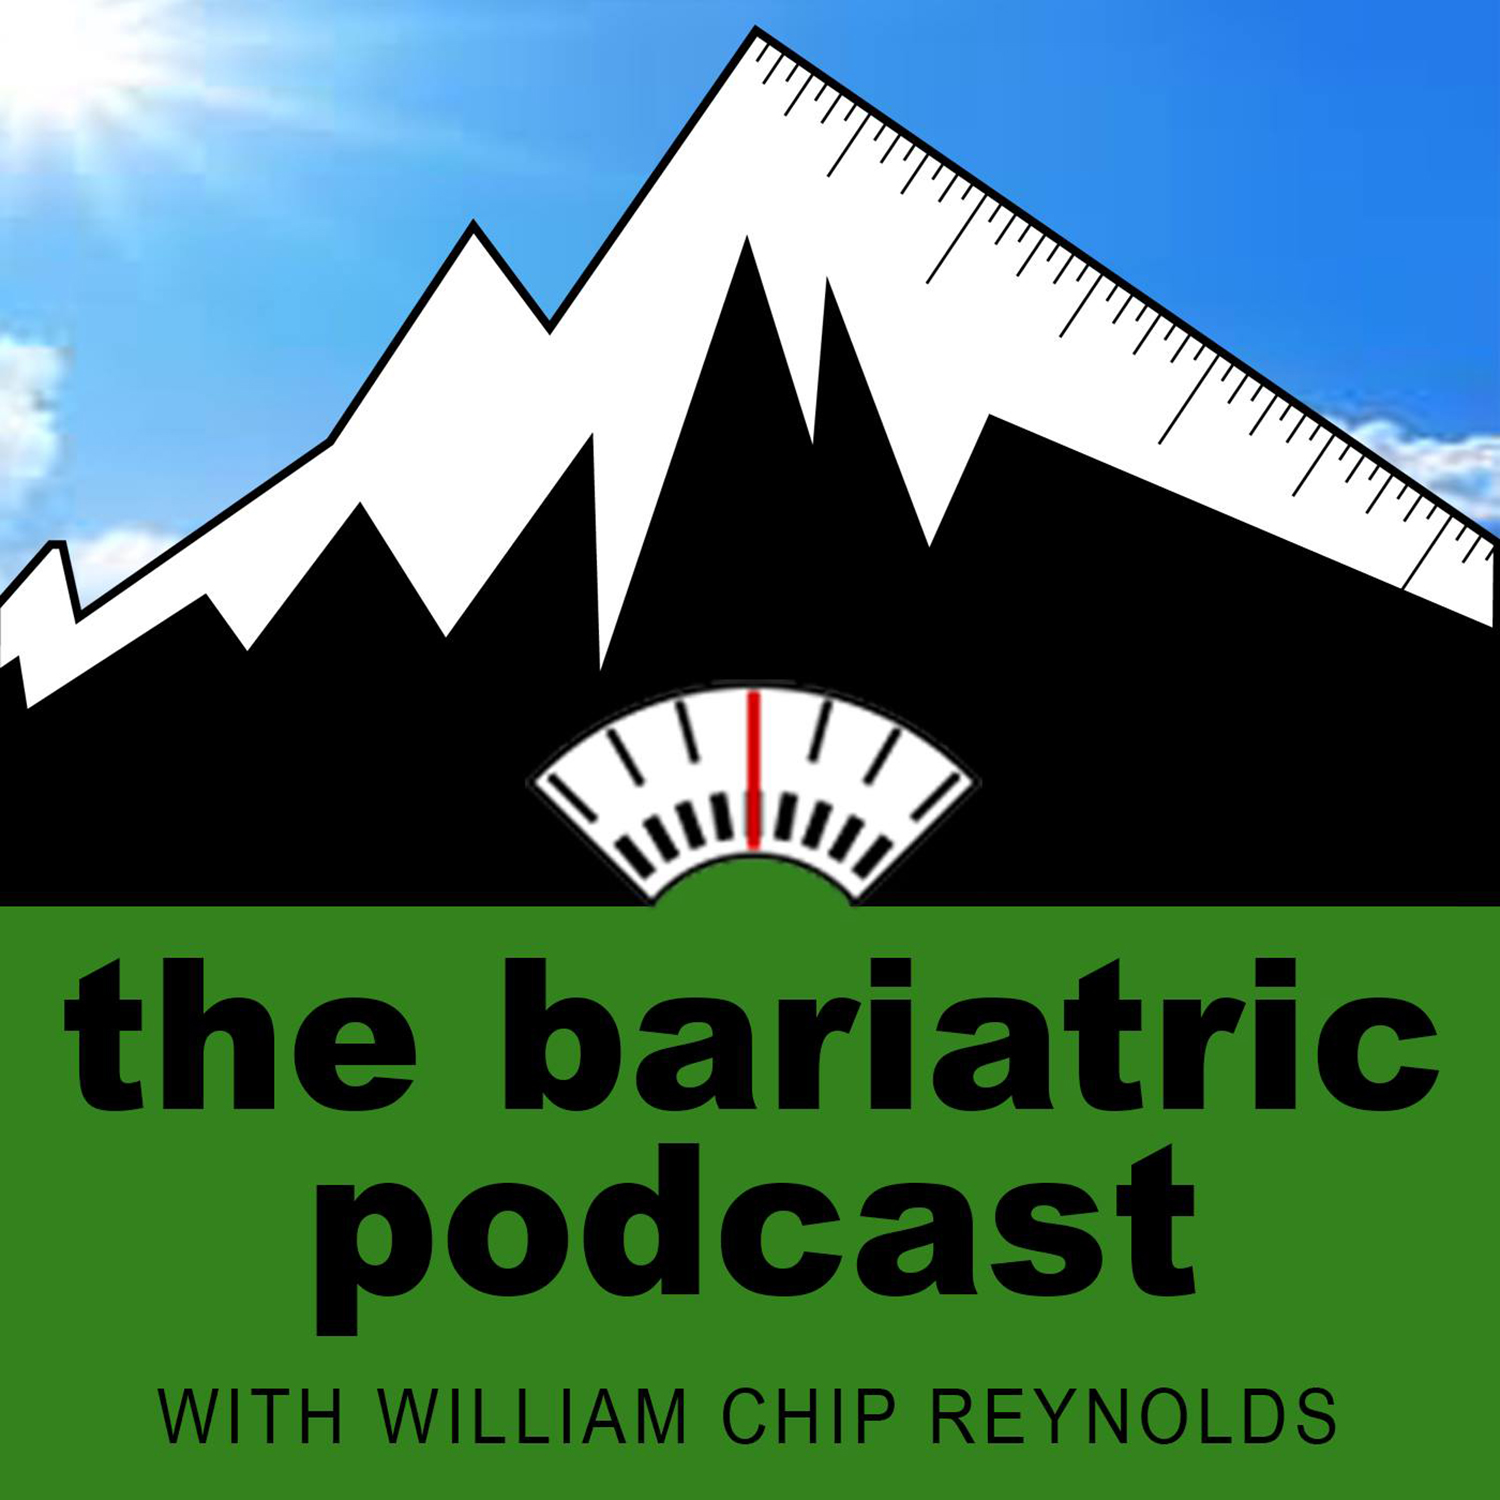 The Bariatric Podcast Episode Three